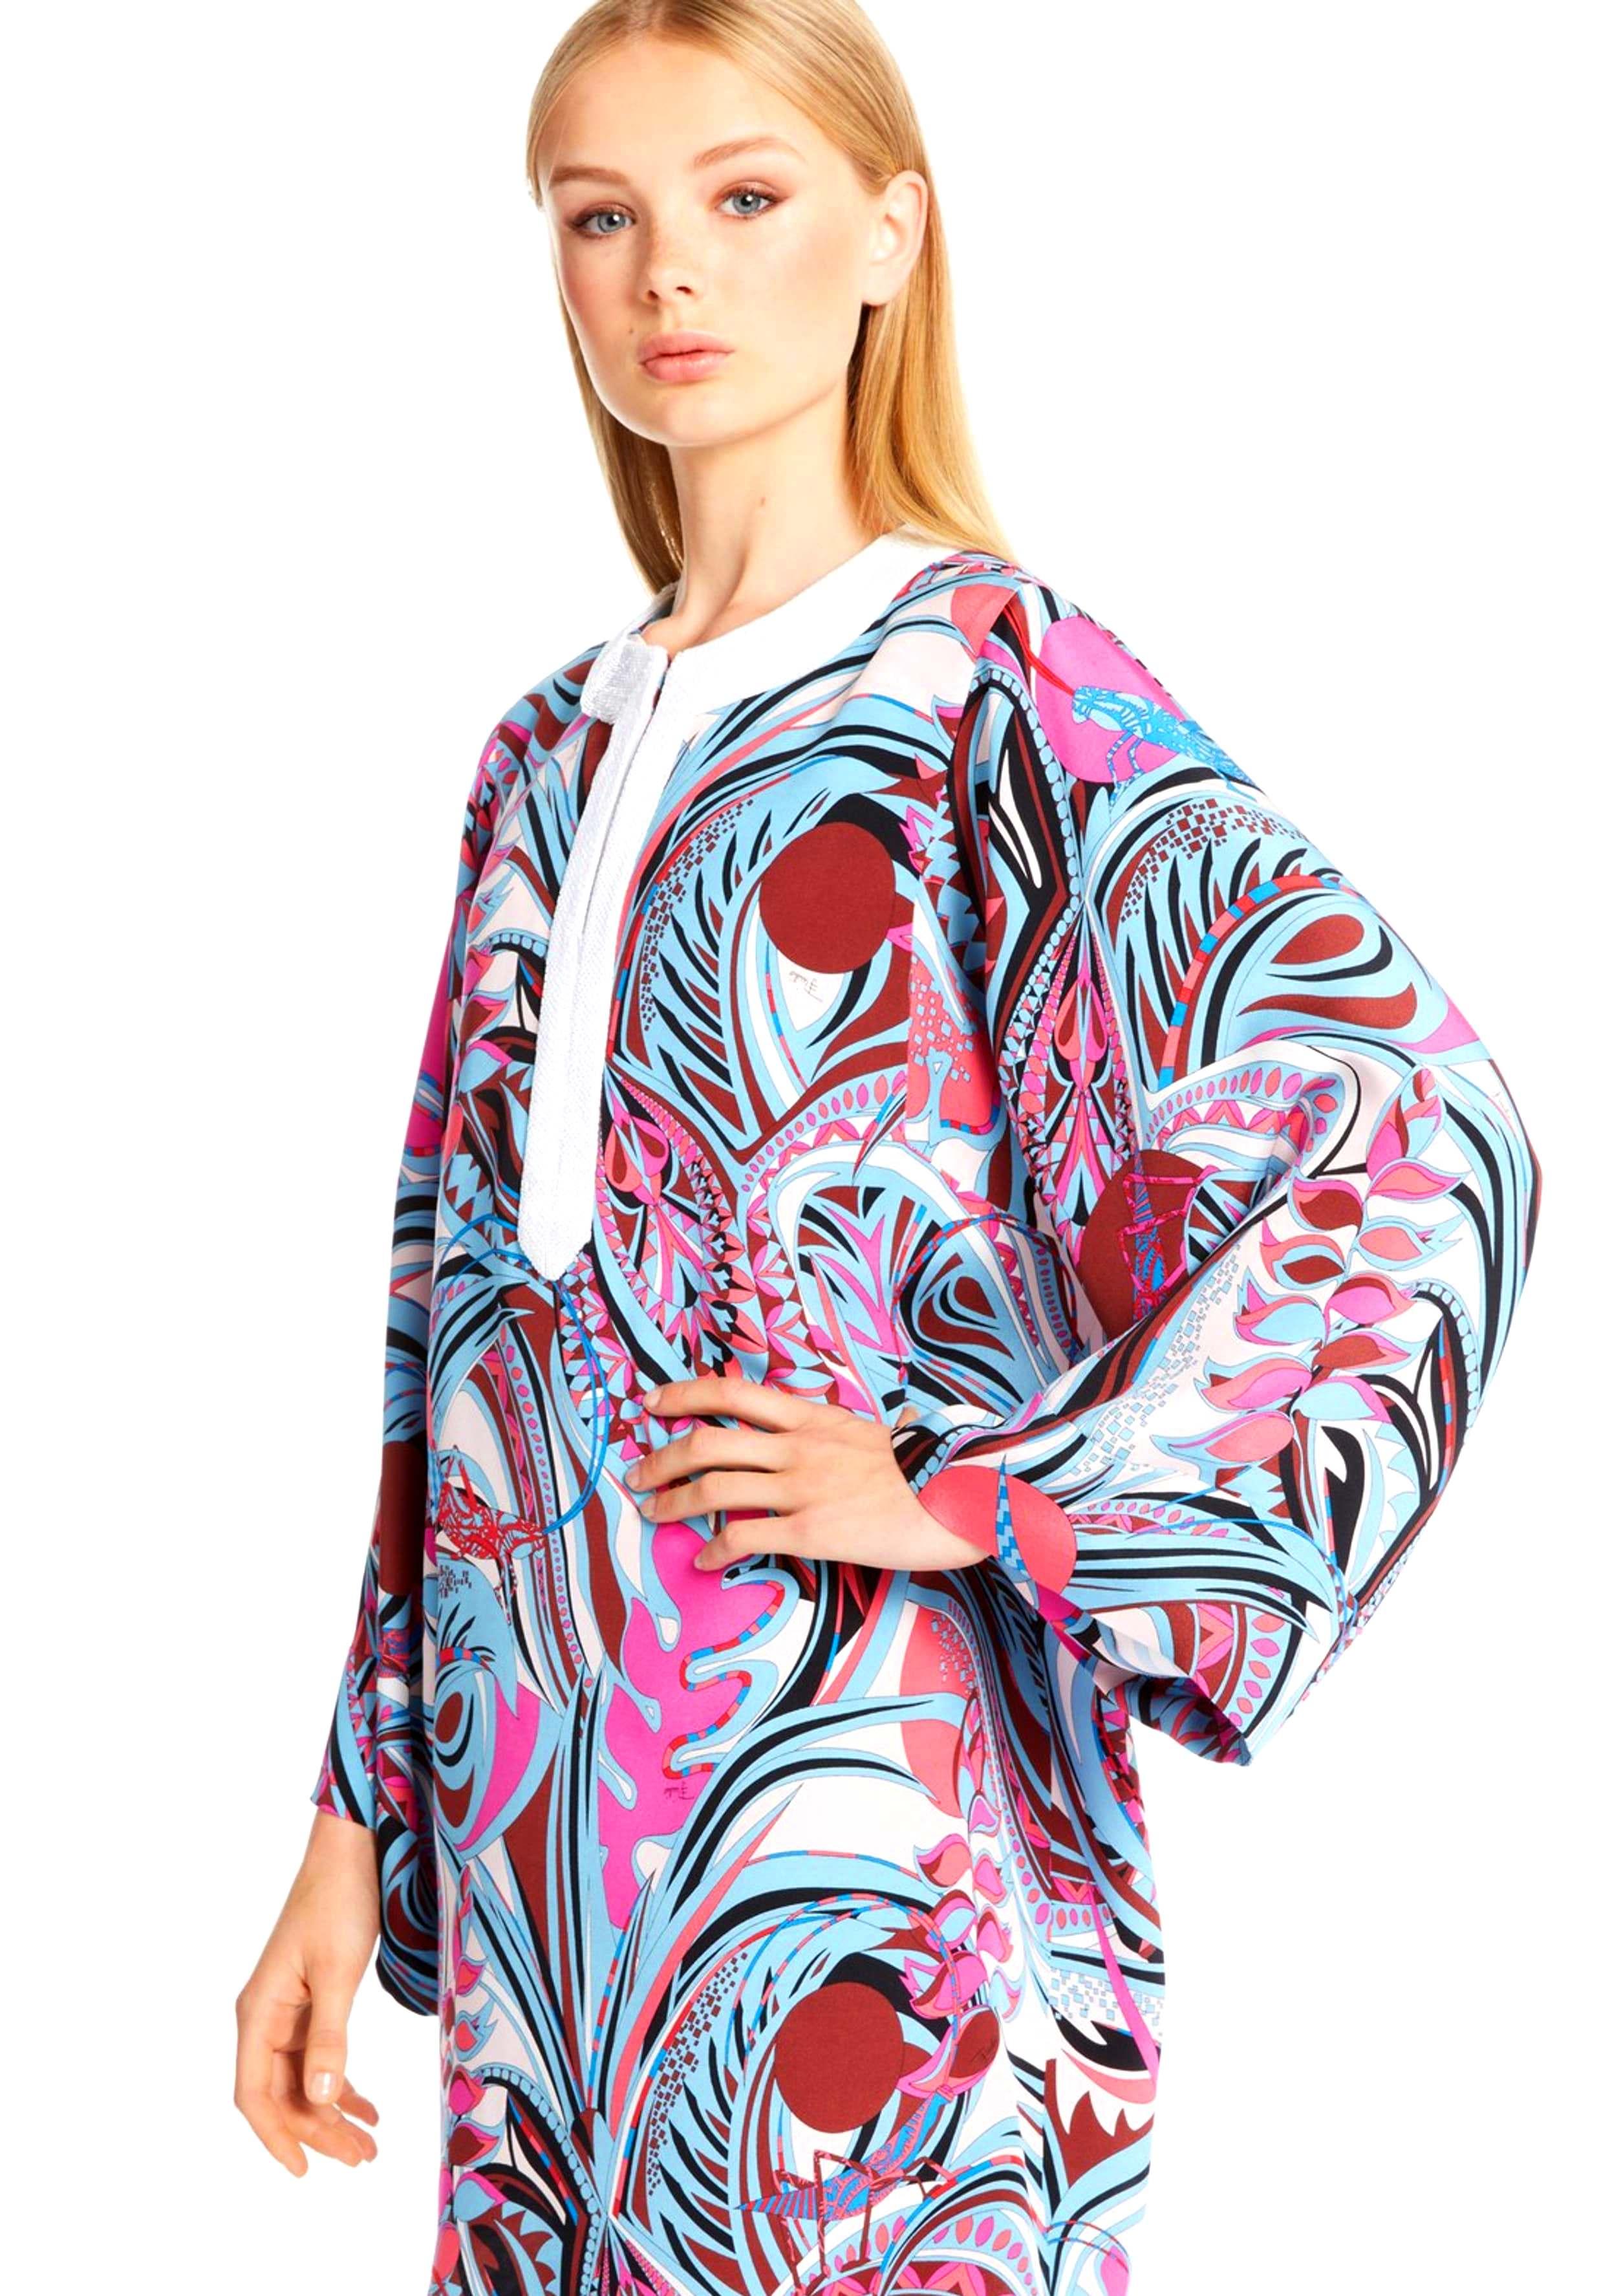 A stunning piece by Emilio Pucci
Made of finest printed lush cady silk
Signature print signed with 